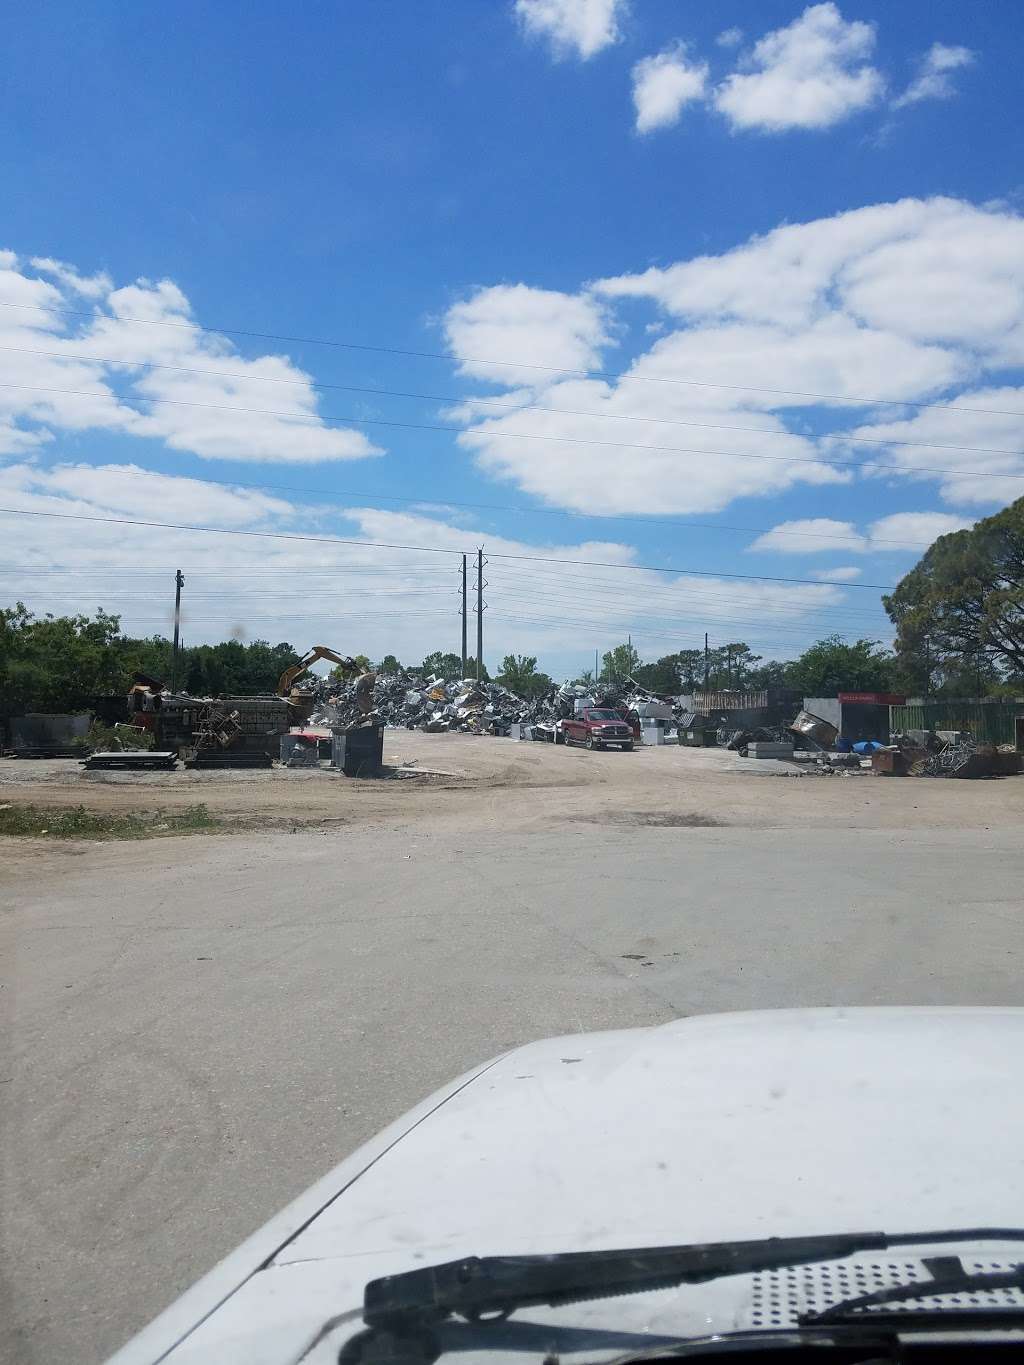 419 Metal-Auto Recycling Center | 600 Old Sanford Oviedo Rd, Winter Springs, FL 32708 | Phone: (407) 327-4419